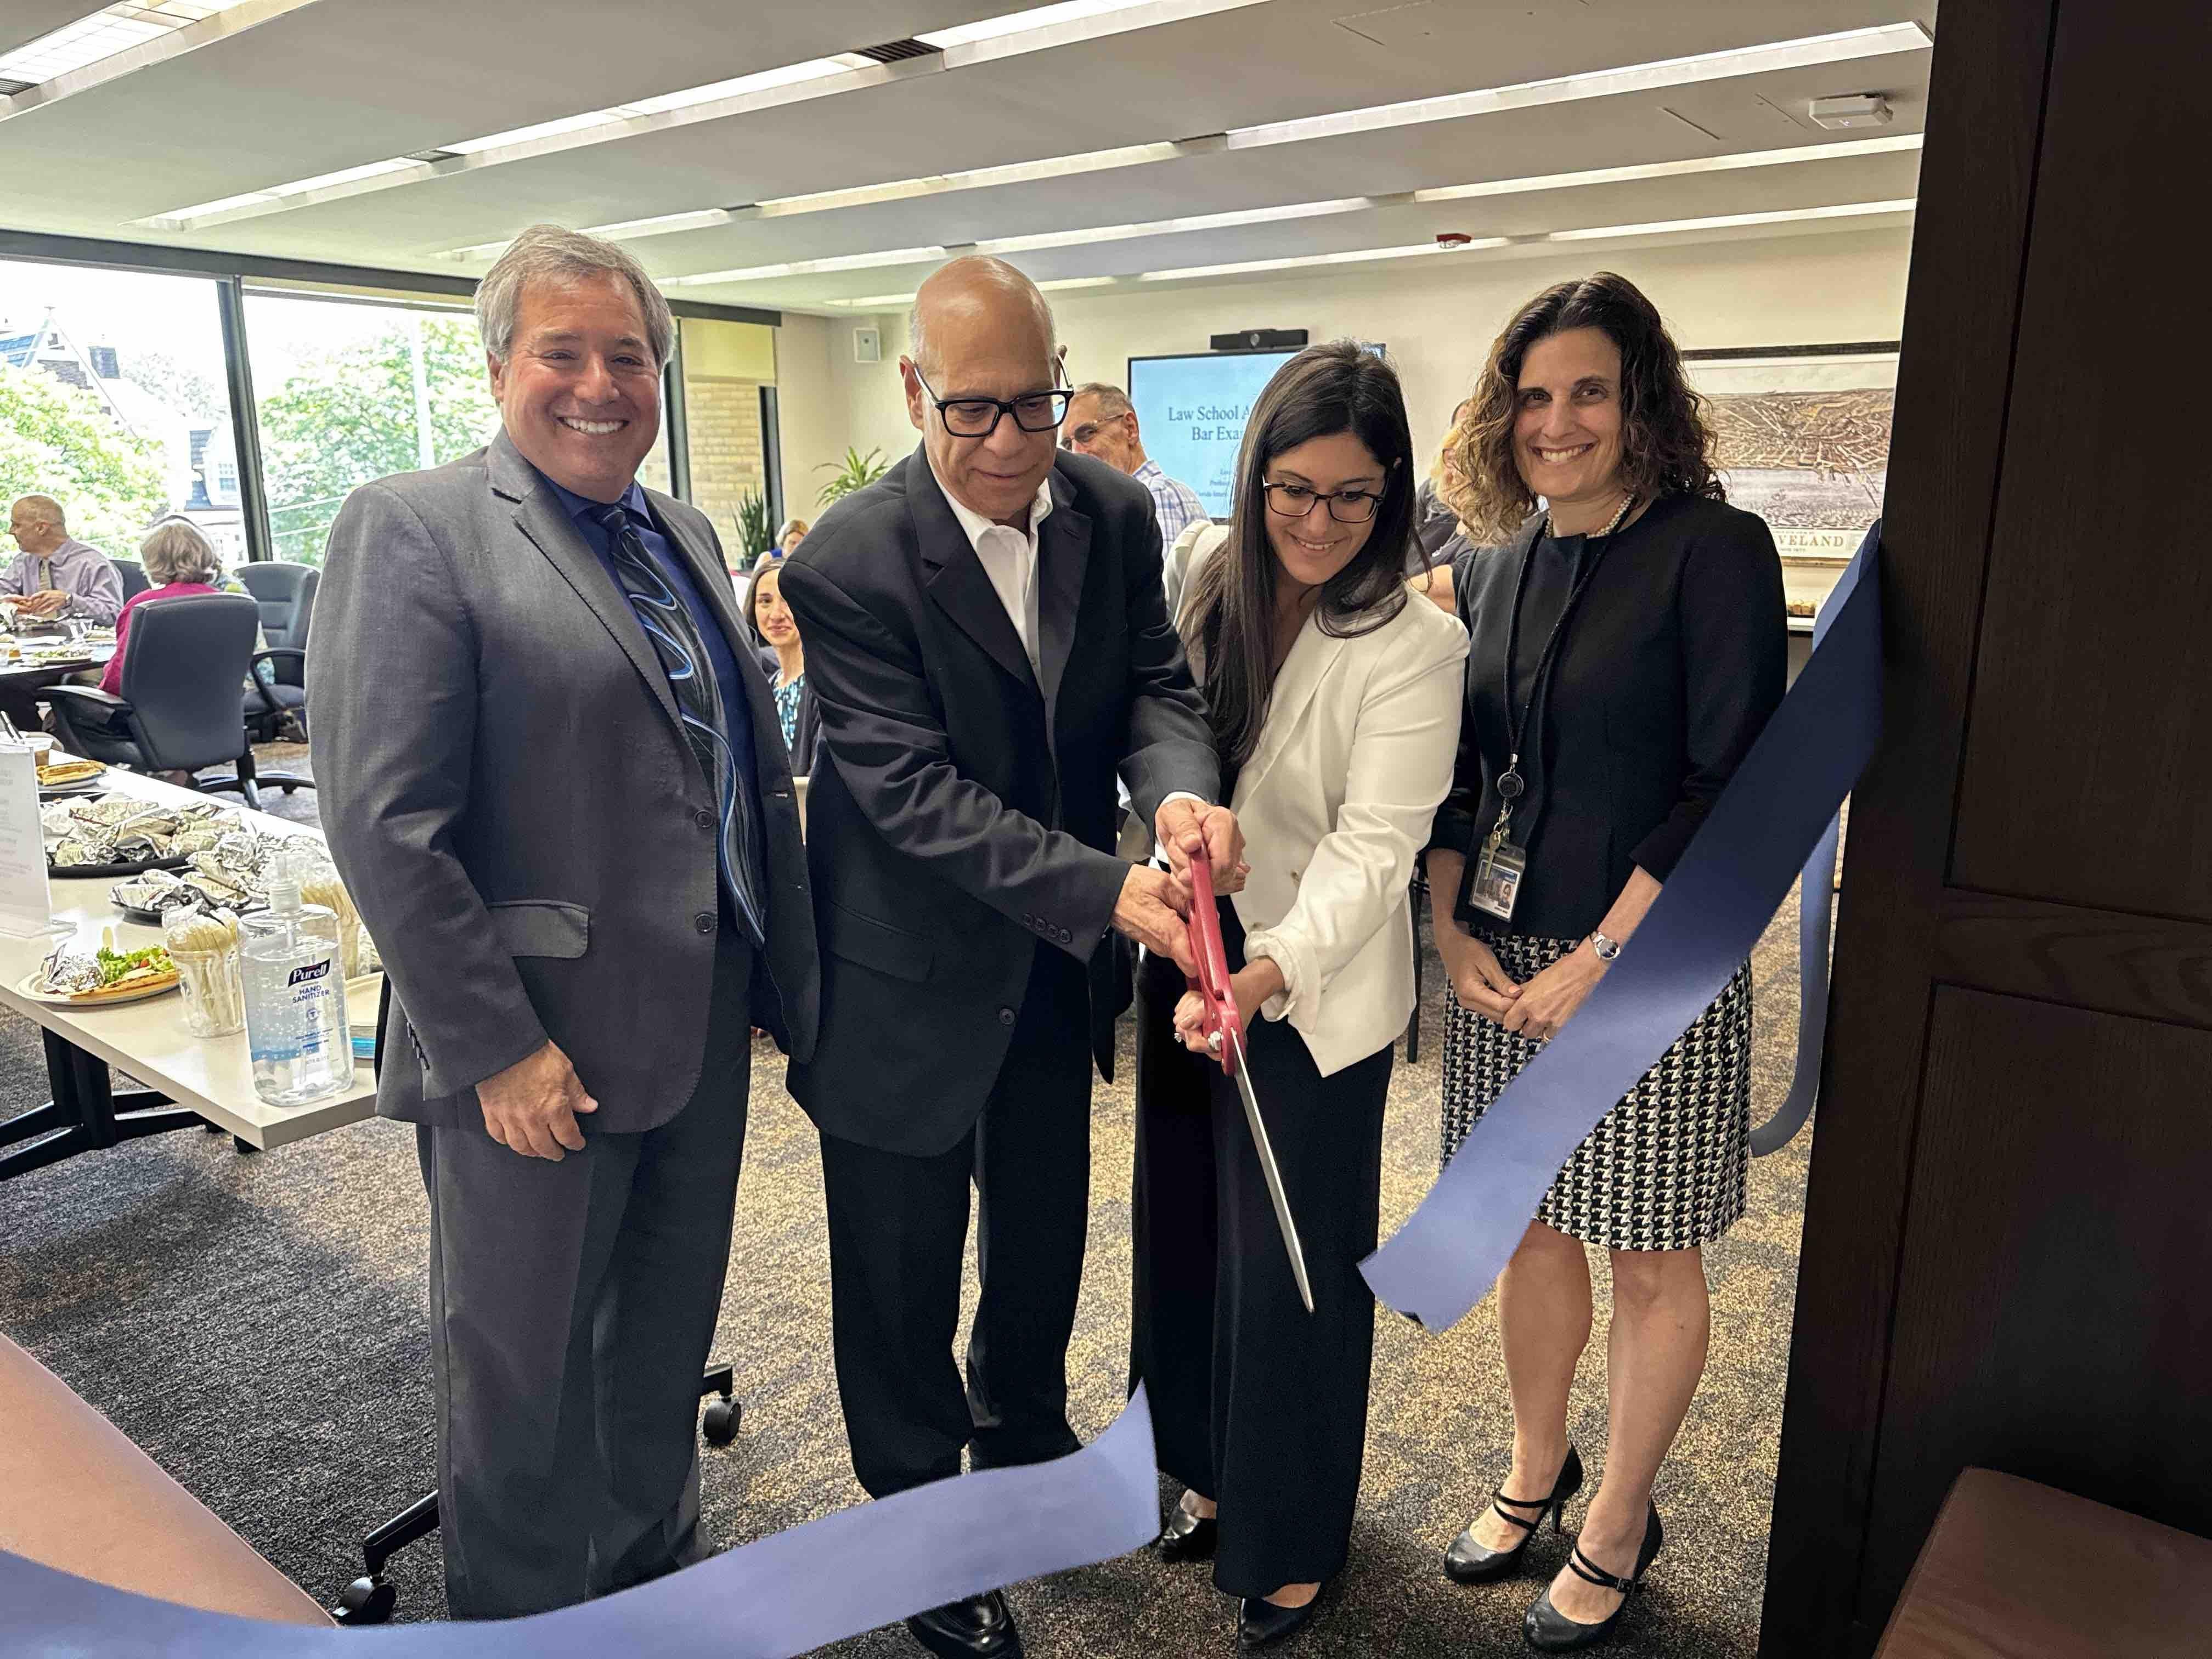 From left to right: Michael Scharf, George Simon, Stephanie Simon, Jessica Berg cutting a blue ribbon with giant scissors over the doorway of the newly renovated faculty lounge